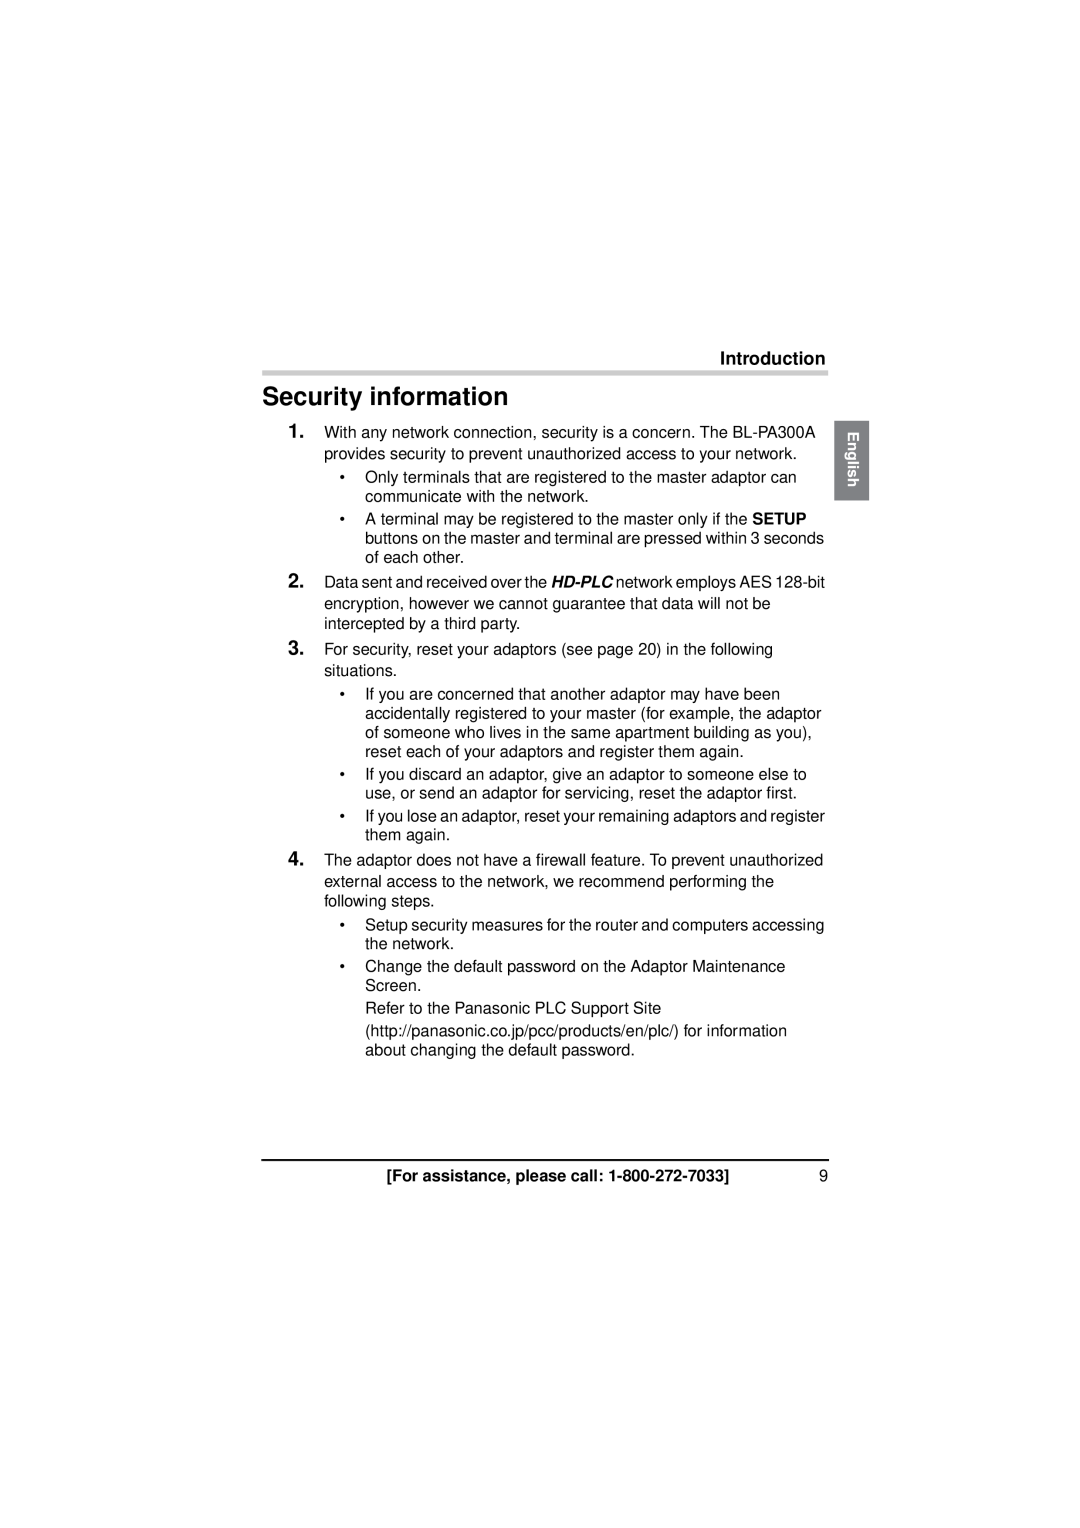 Panasonic BL-PA300KTA warranty Security information, Introduction, For assistance, please call 